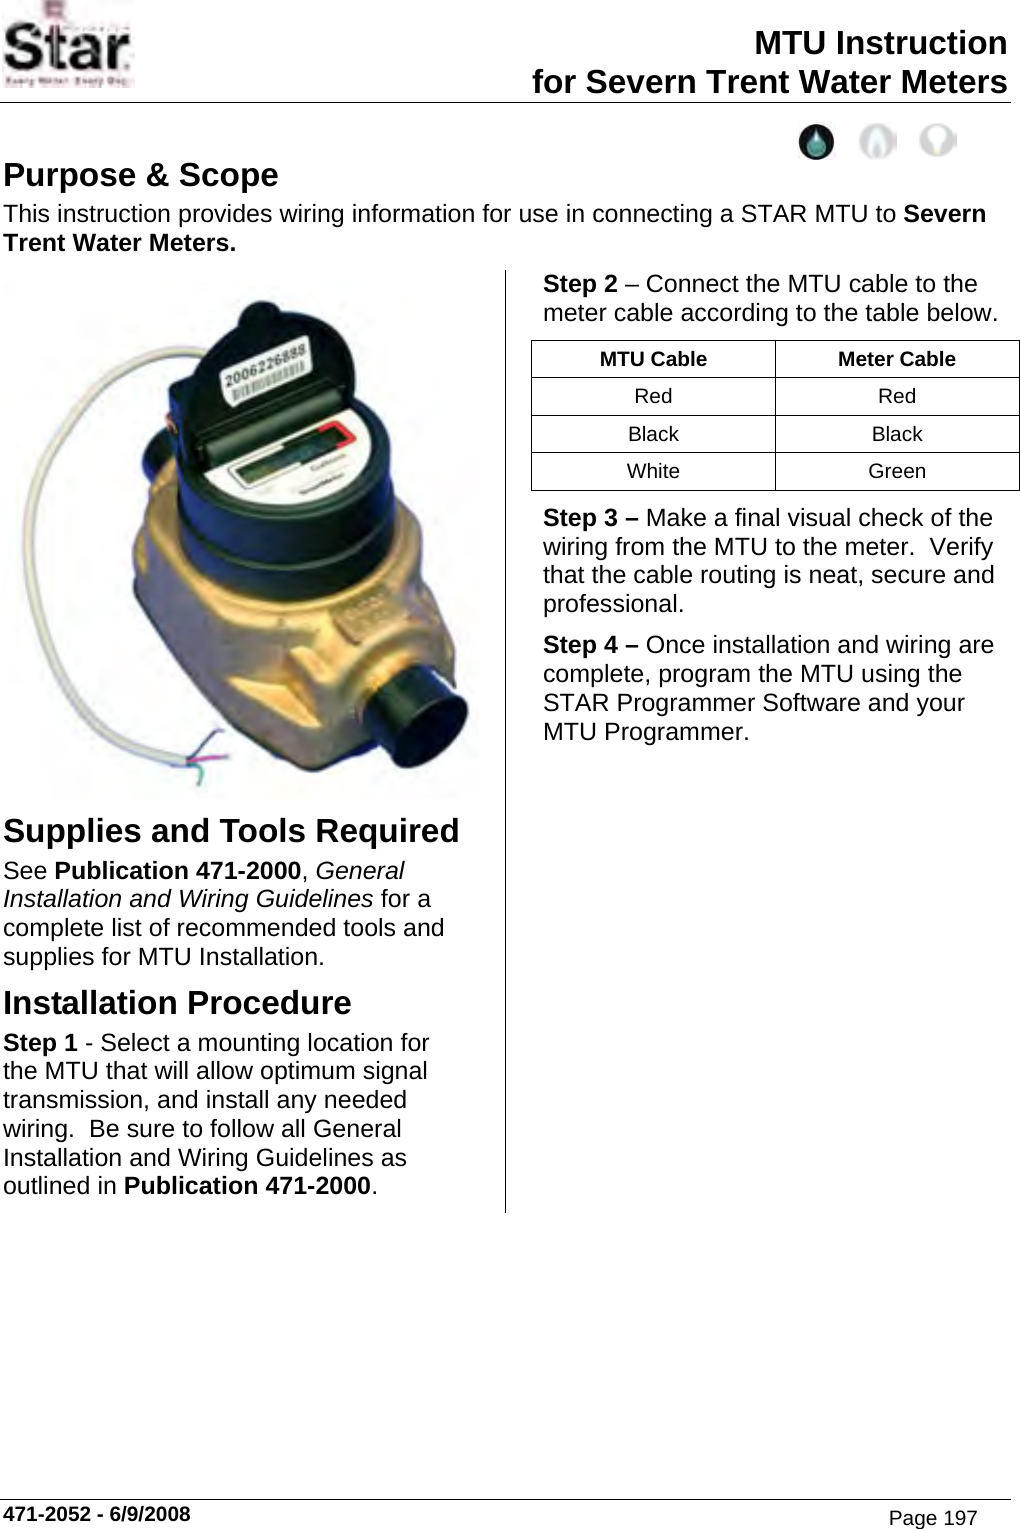 MTU Instruction for Severn Trent Water Meters 471-2052 - 6/9/2008 Purpose &amp; Scope This instruction provides wiring information for use in connecting a STAR MTU to Severn Trent Water Meters.  Supplies and Tools Required See Publication 471-2000, General Installation and Wiring Guidelines for a complete list of recommended tools and supplies for MTU Installation. Installation Procedure Step 1 - Select a mounting location for the MTU that will allow optimum signal transmission, and install any needed wiring.  Be sure to follow all General Installation and Wiring Guidelines as outlined in Publication 471-2000. Step 2 – Connect the MTU cable to the meter cable according to the table below. MTU Cable  Meter Cable Red Red Black Black White Green Step 3 – Make a final visual check of the wiring from the MTU to the meter.  Verify that the cable routing is neat, secure and professional. Step 4 – Once installation and wiring are complete, program the MTU using the STAR Programmer Software and your MTU Programmer. Page 197